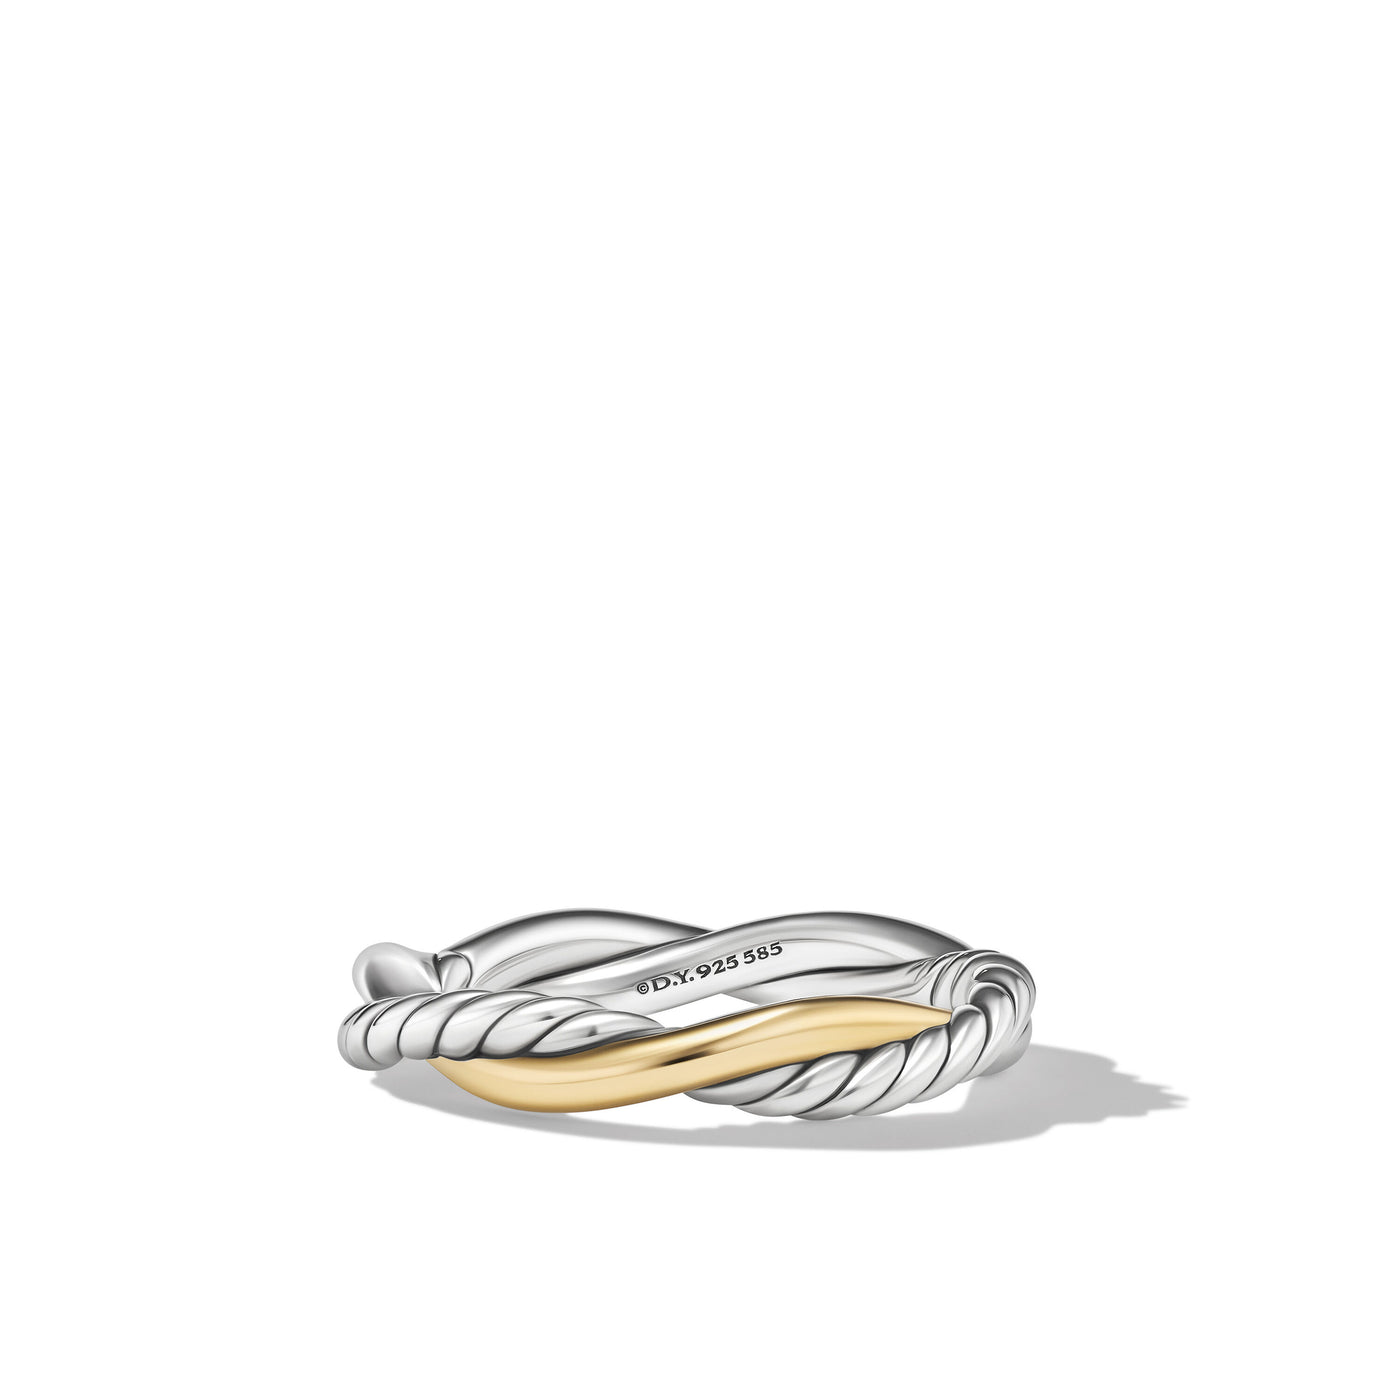 Petite Infinity Band Ring in Sterling Silver with 14K Yellow Gold\, 4mm